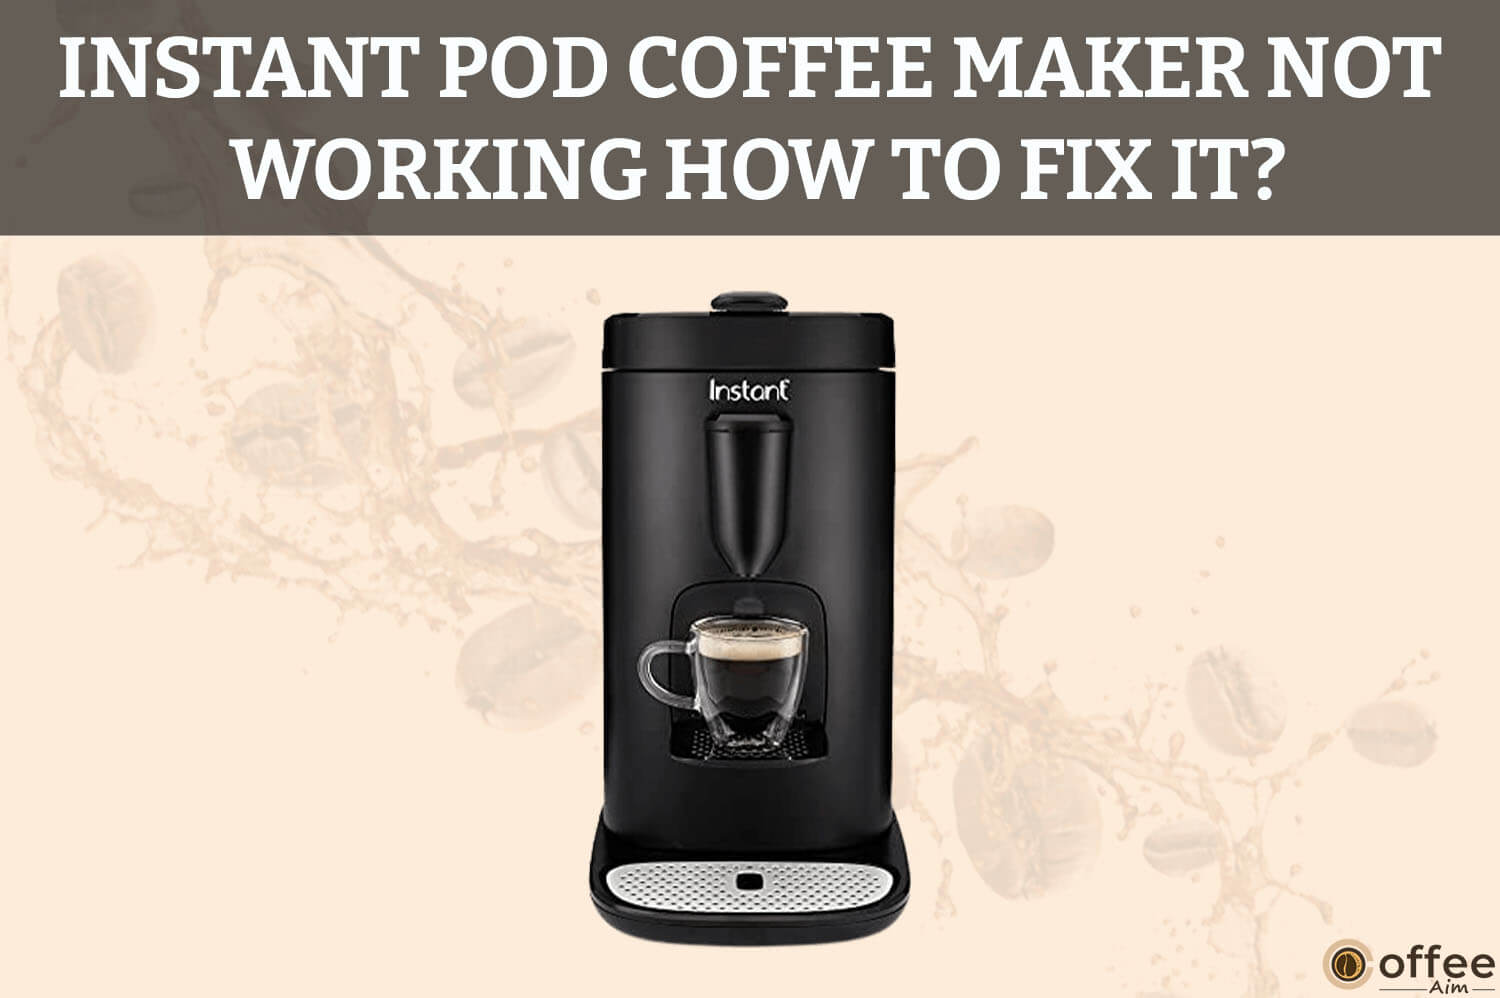 Featured image for the article "Instant Pod Coffee Maker Not Working How to Fix It"